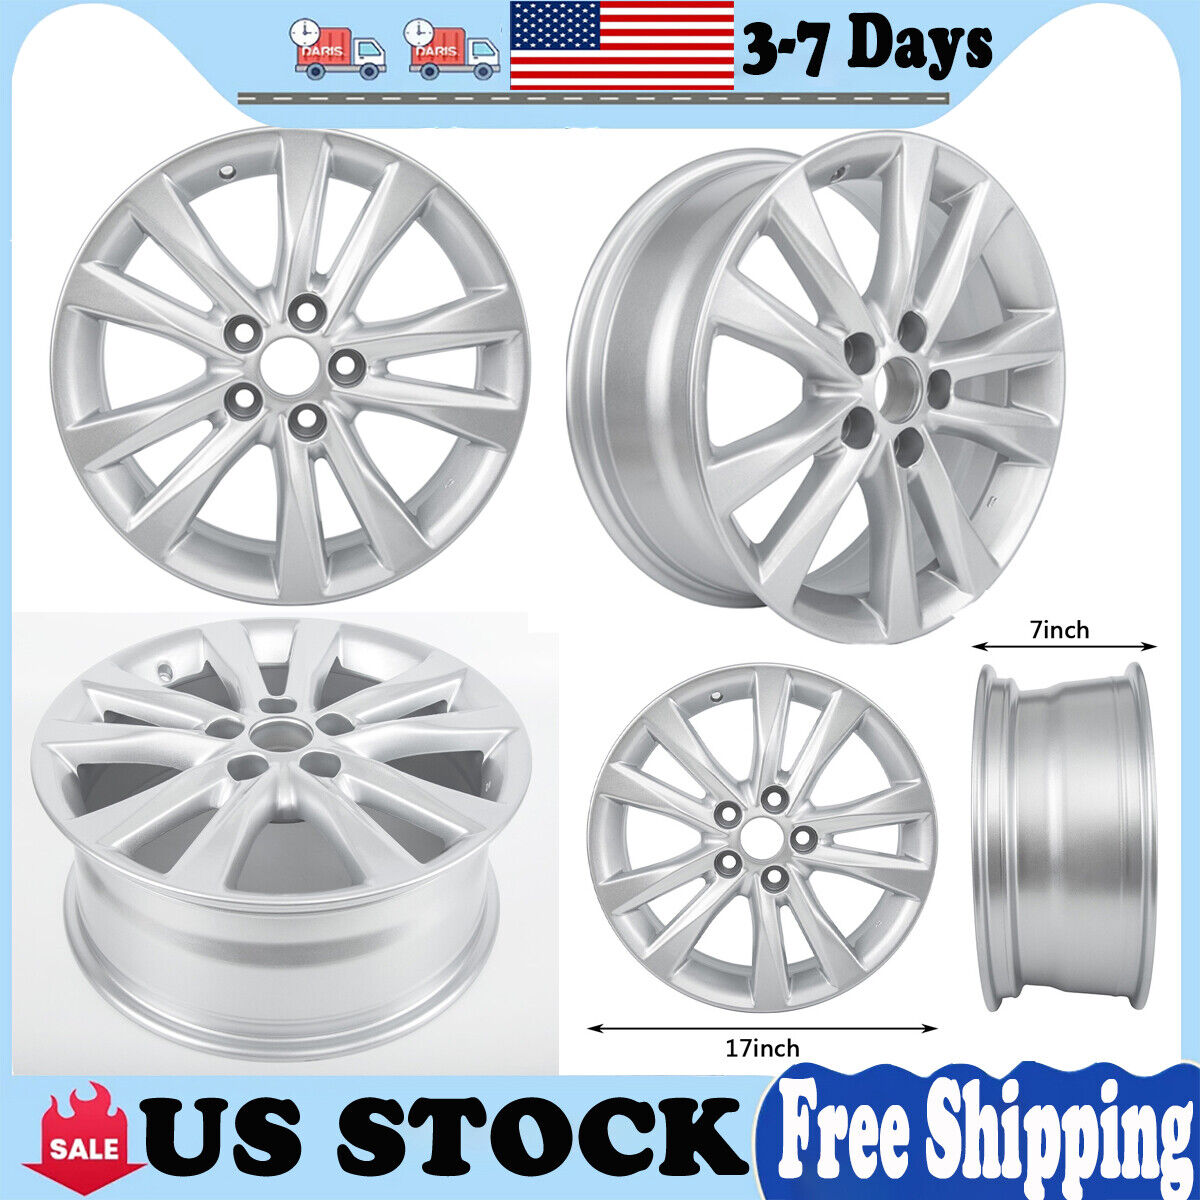 17 x 7 INCH Replacement Alloy Wheel for 2006 2007 2008 Lexus IS250 IS350 Rim